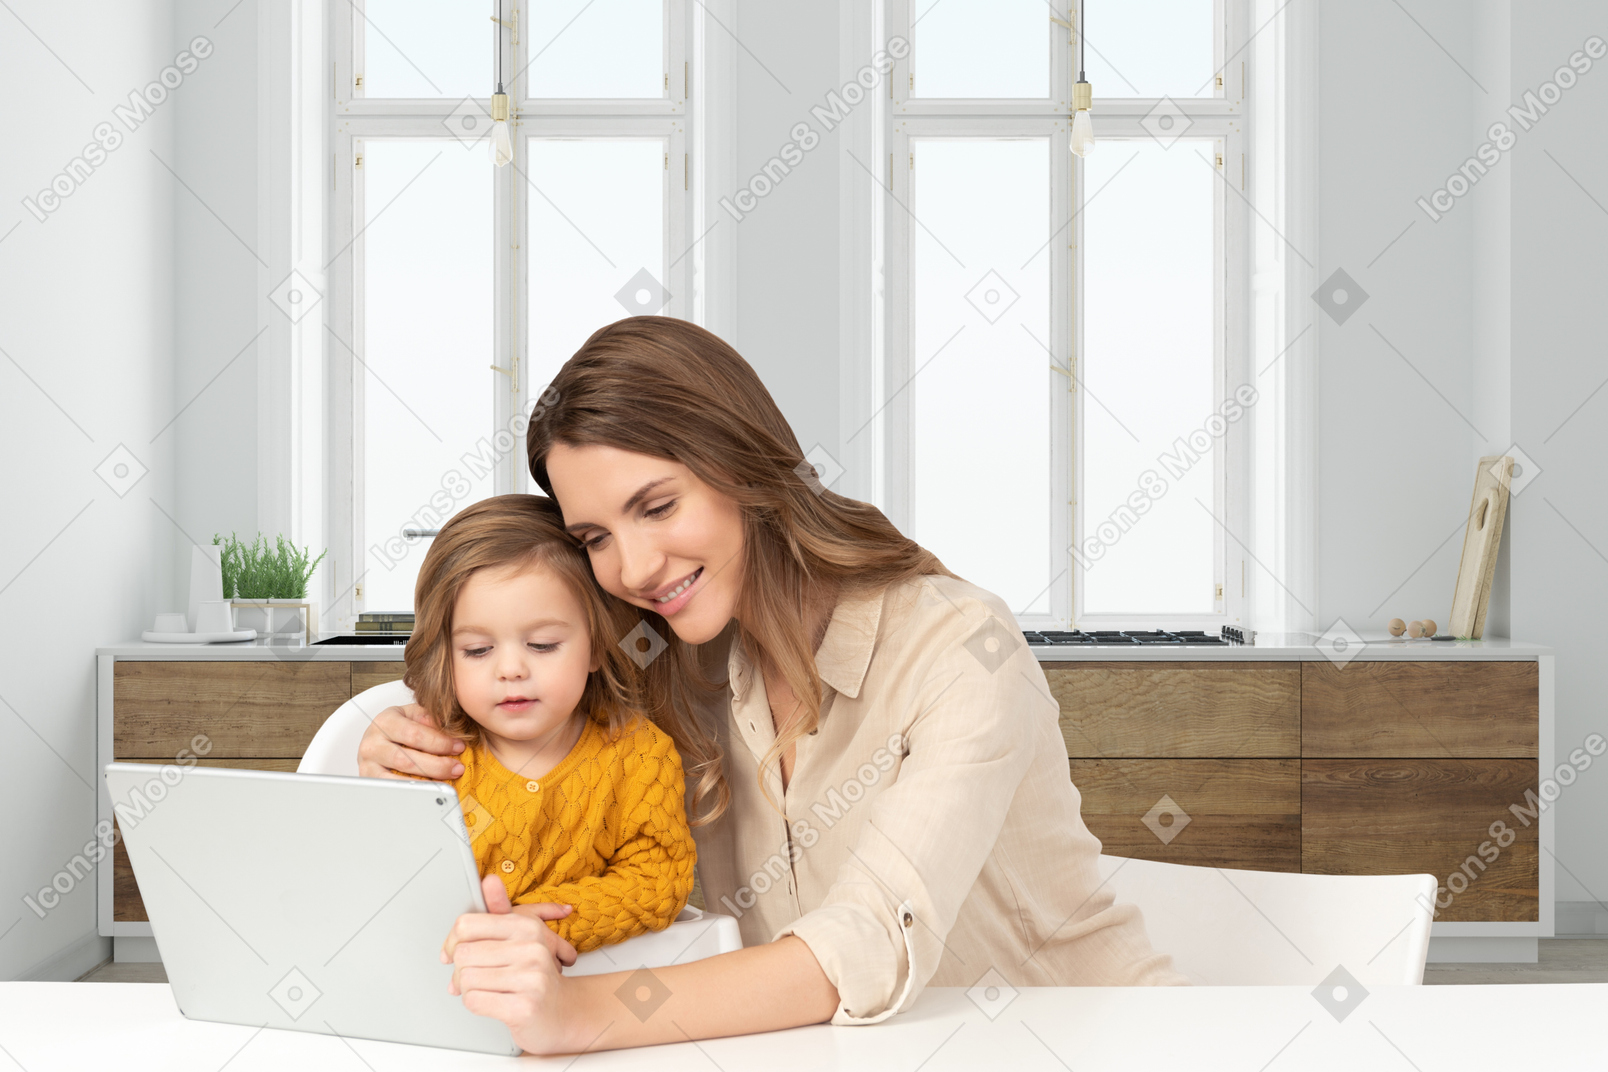 A woman and a child are looking at a laptop